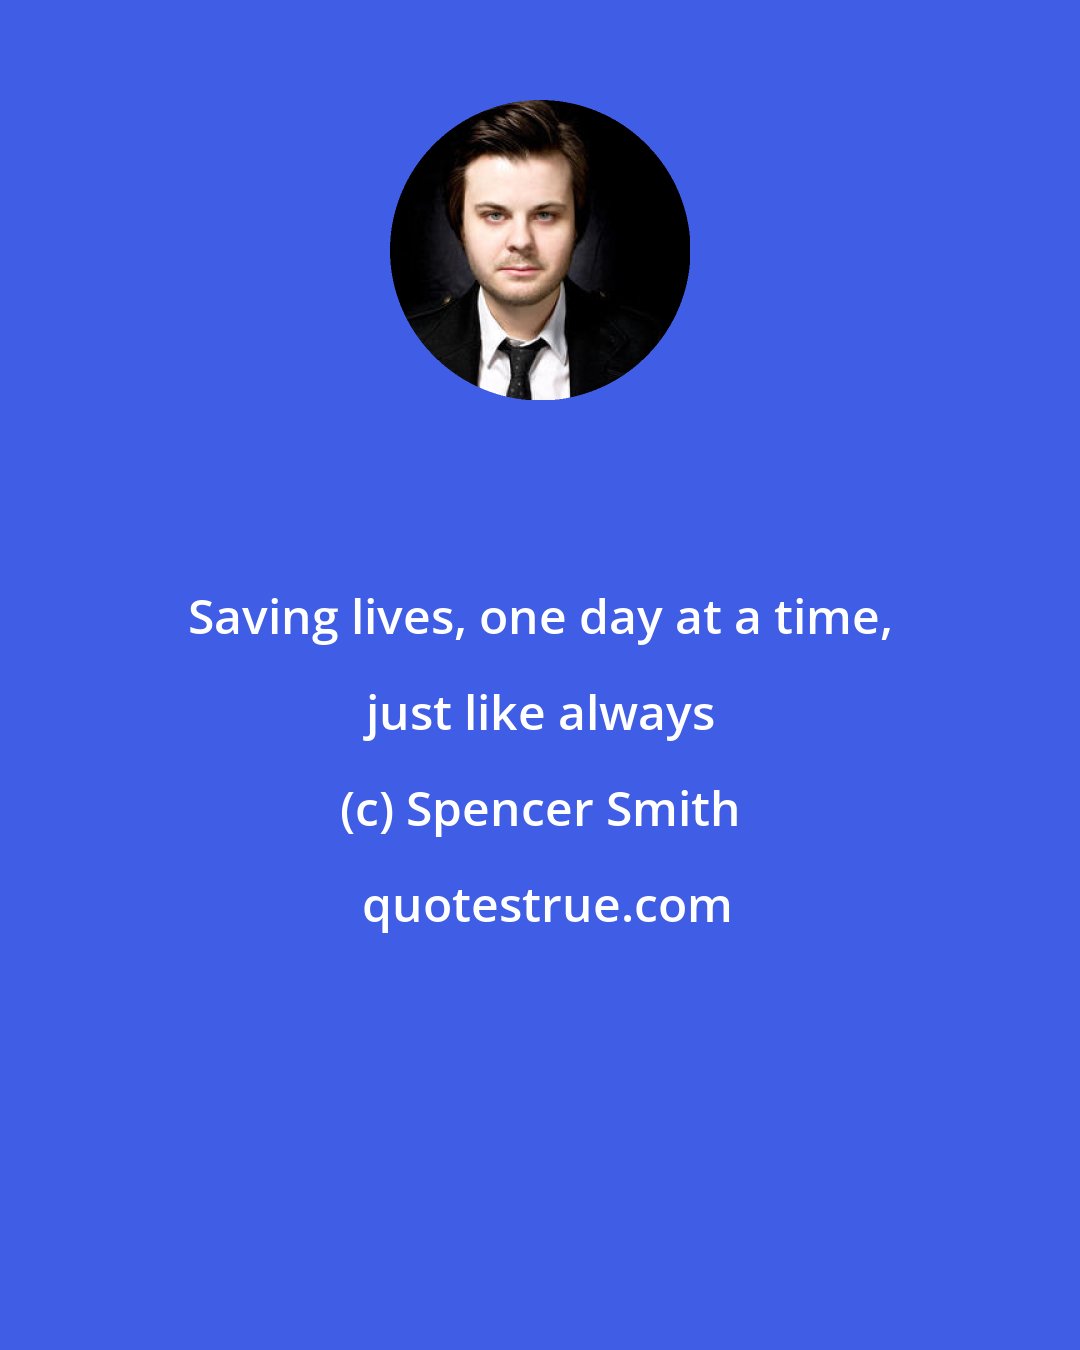 Spencer Smith: Saving lives, one day at a time, just like always